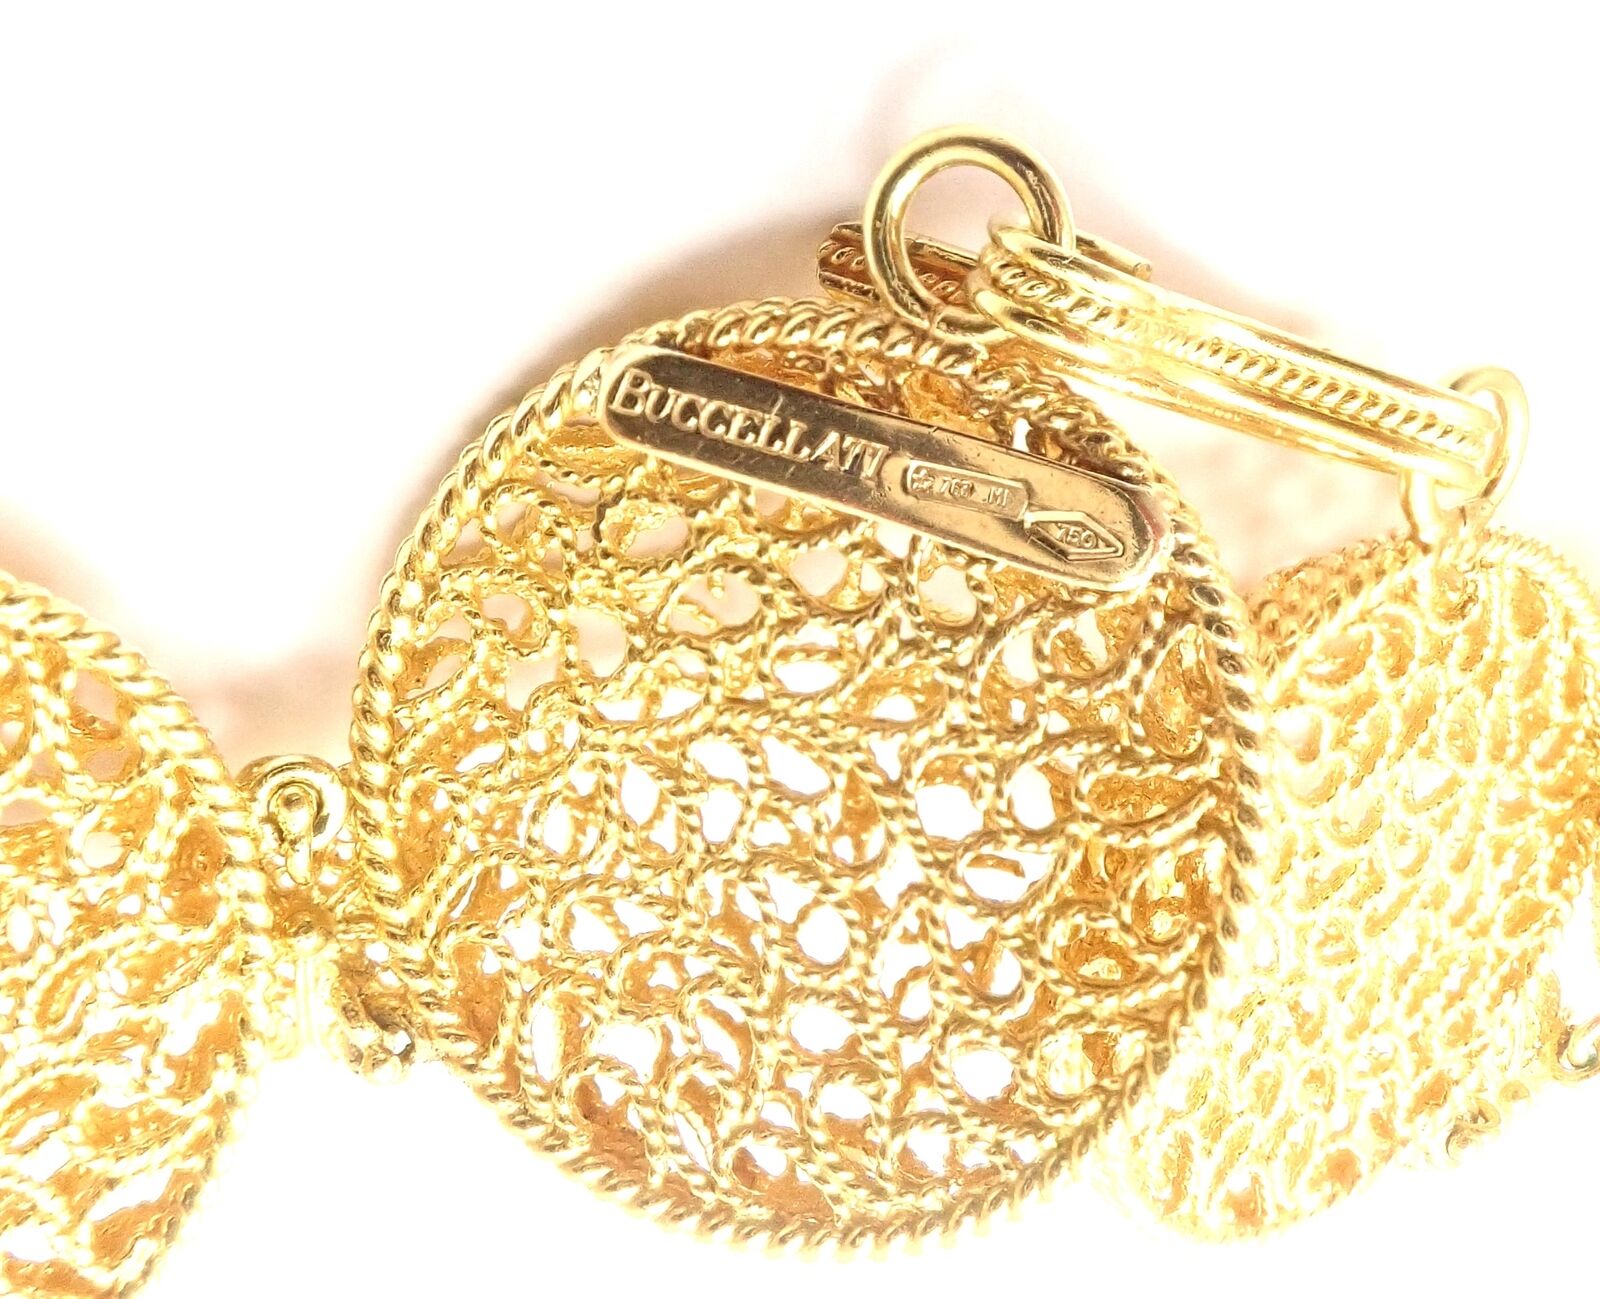 Buccellati Jewelry & Watches:Fine Jewelry:Necklaces & Pendants Authentic! Buccellati Filidoro 18k Yellow Gold Link Necklace